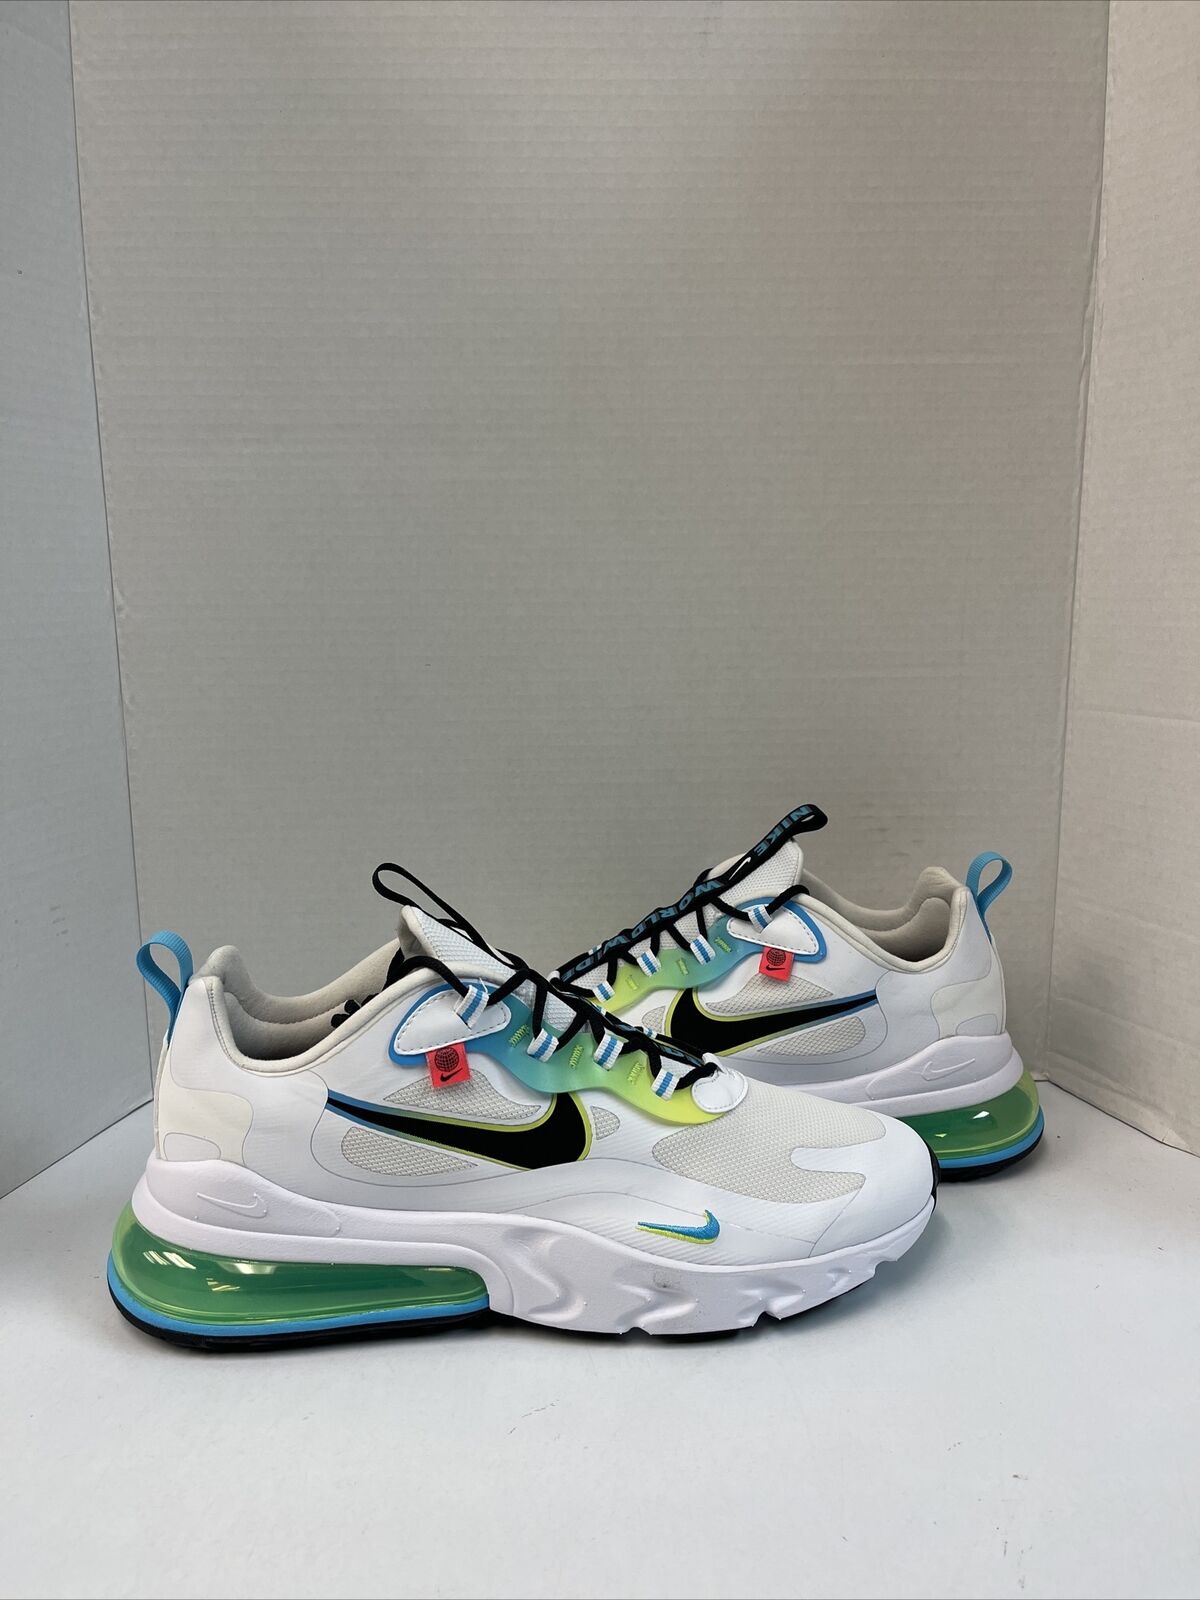 Nike Air Max 270 React Worldwide Pack White 2020 Size 12 Brand New  CK6457-100